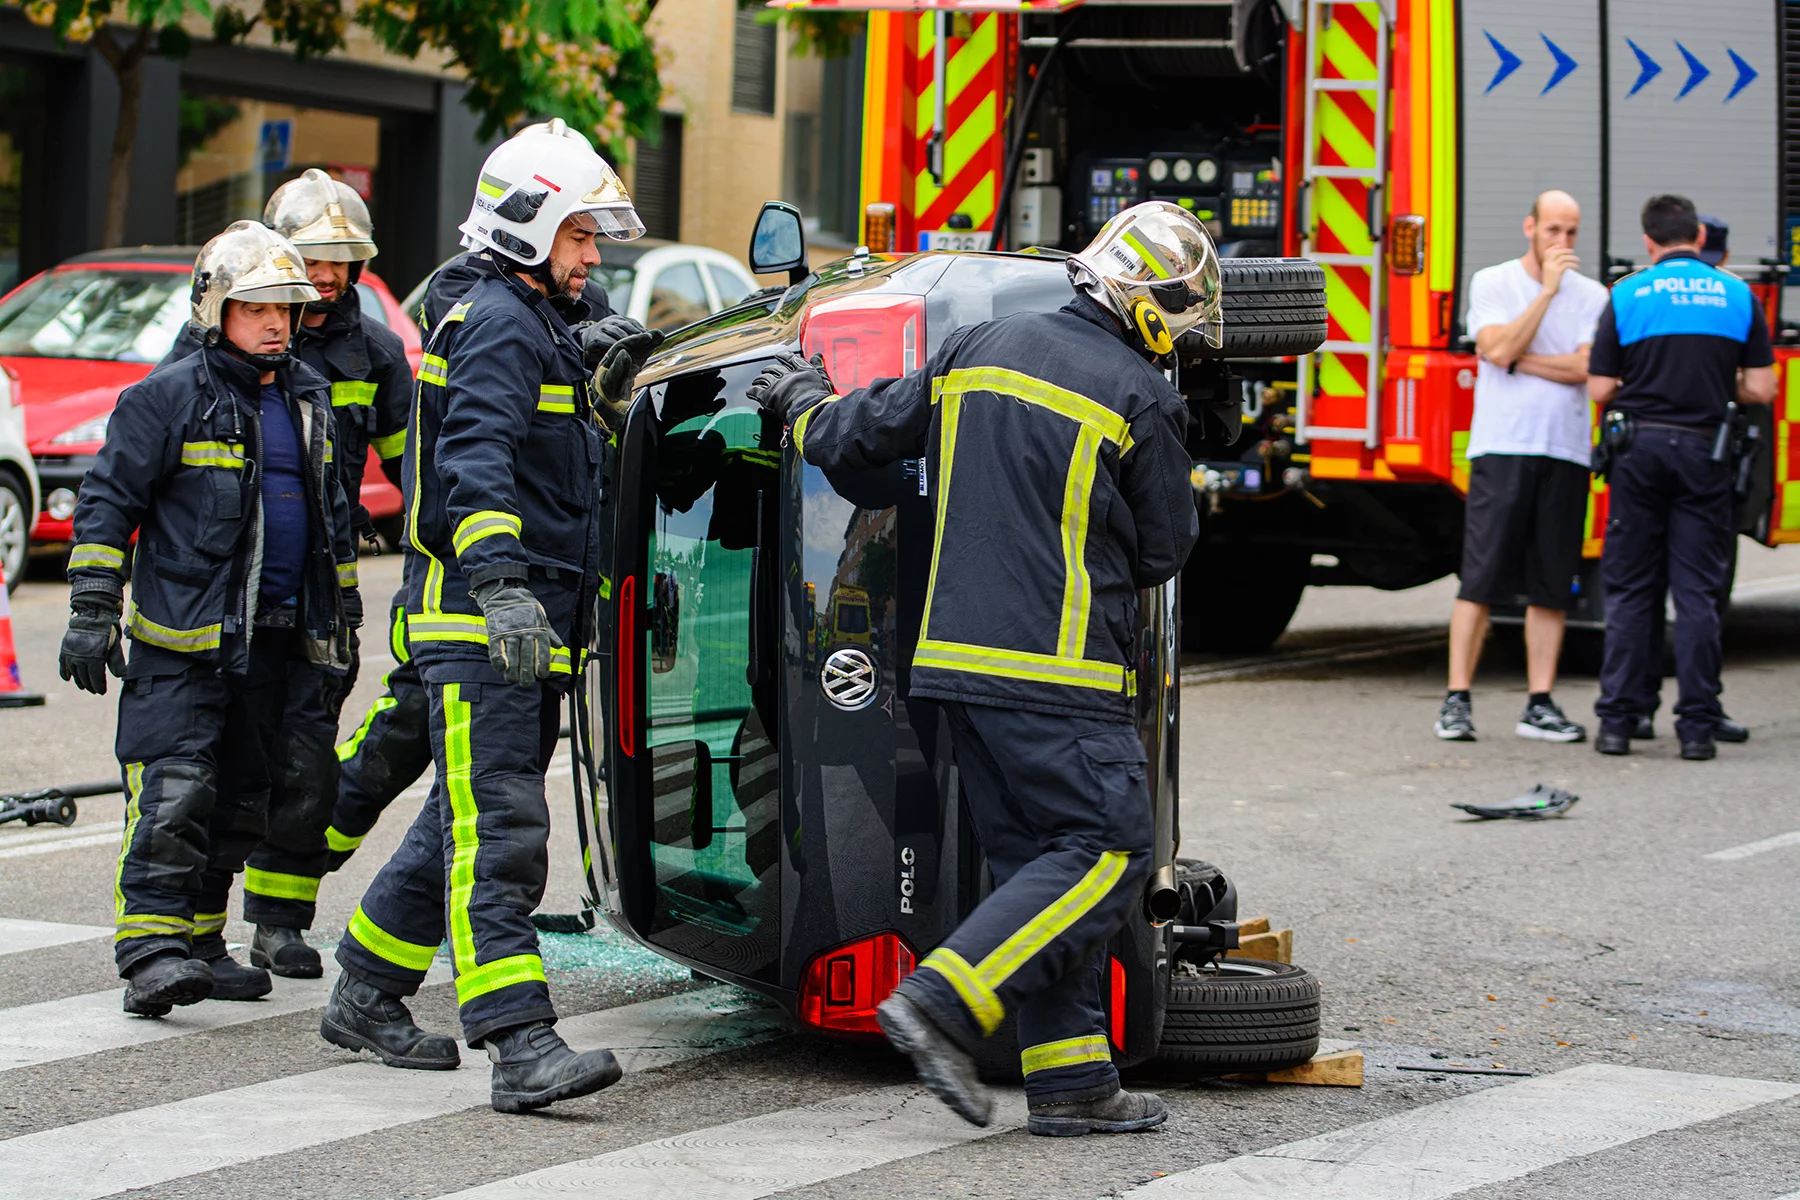 Firefighters at the scene of a car crash in Madrid, Spain